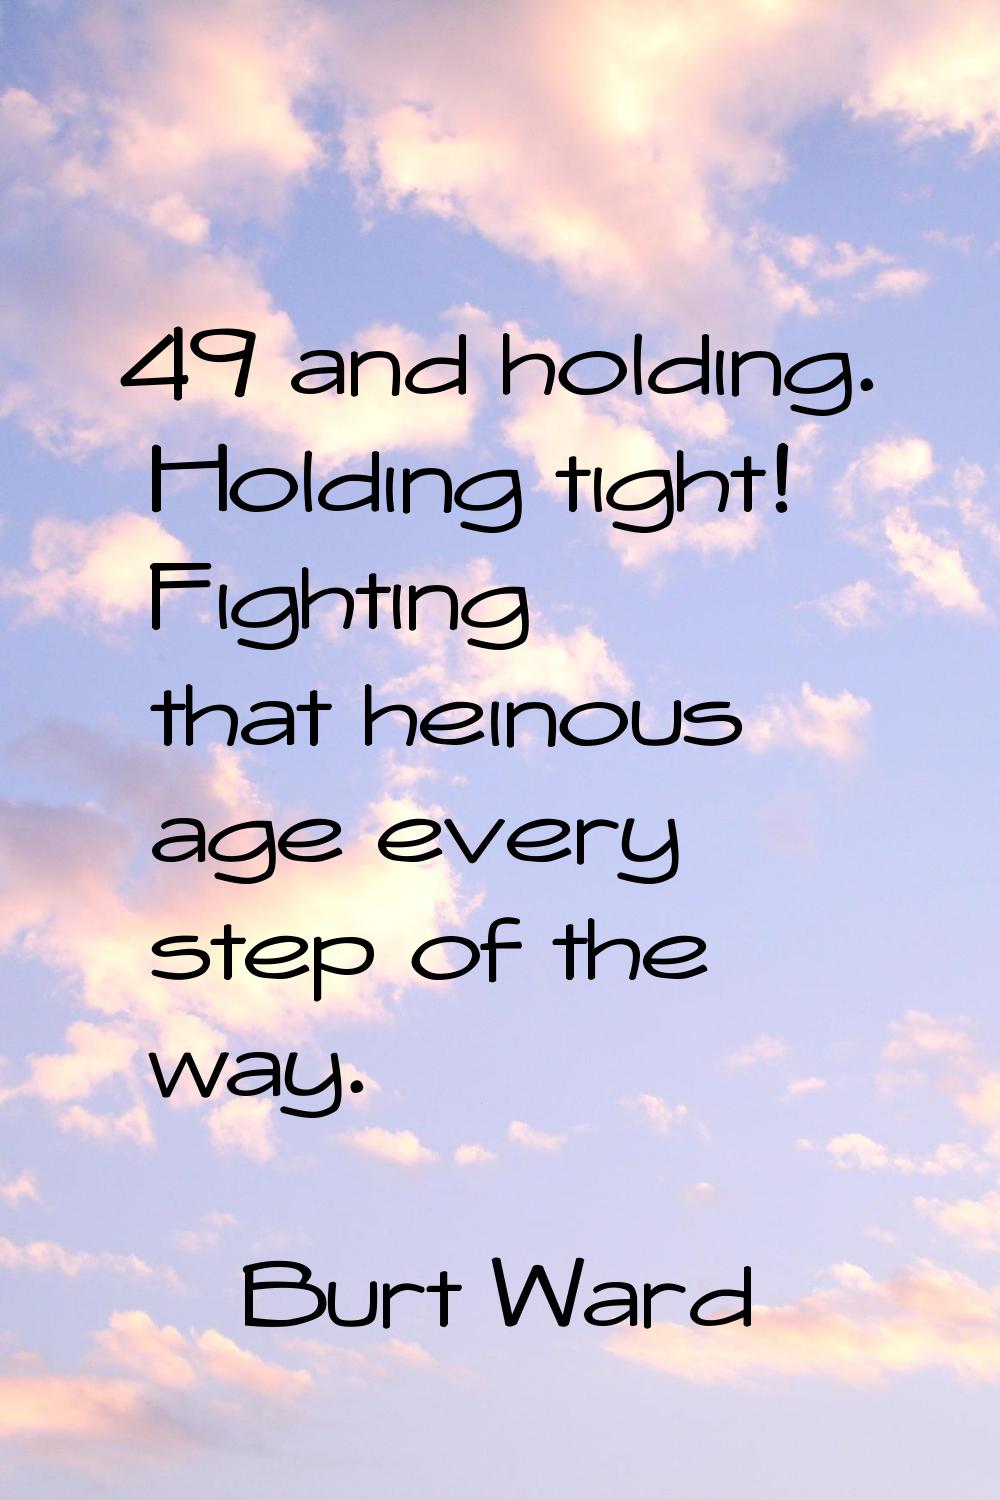 49 and holding. Holding tight! Fighting that heinous age every step of the way.